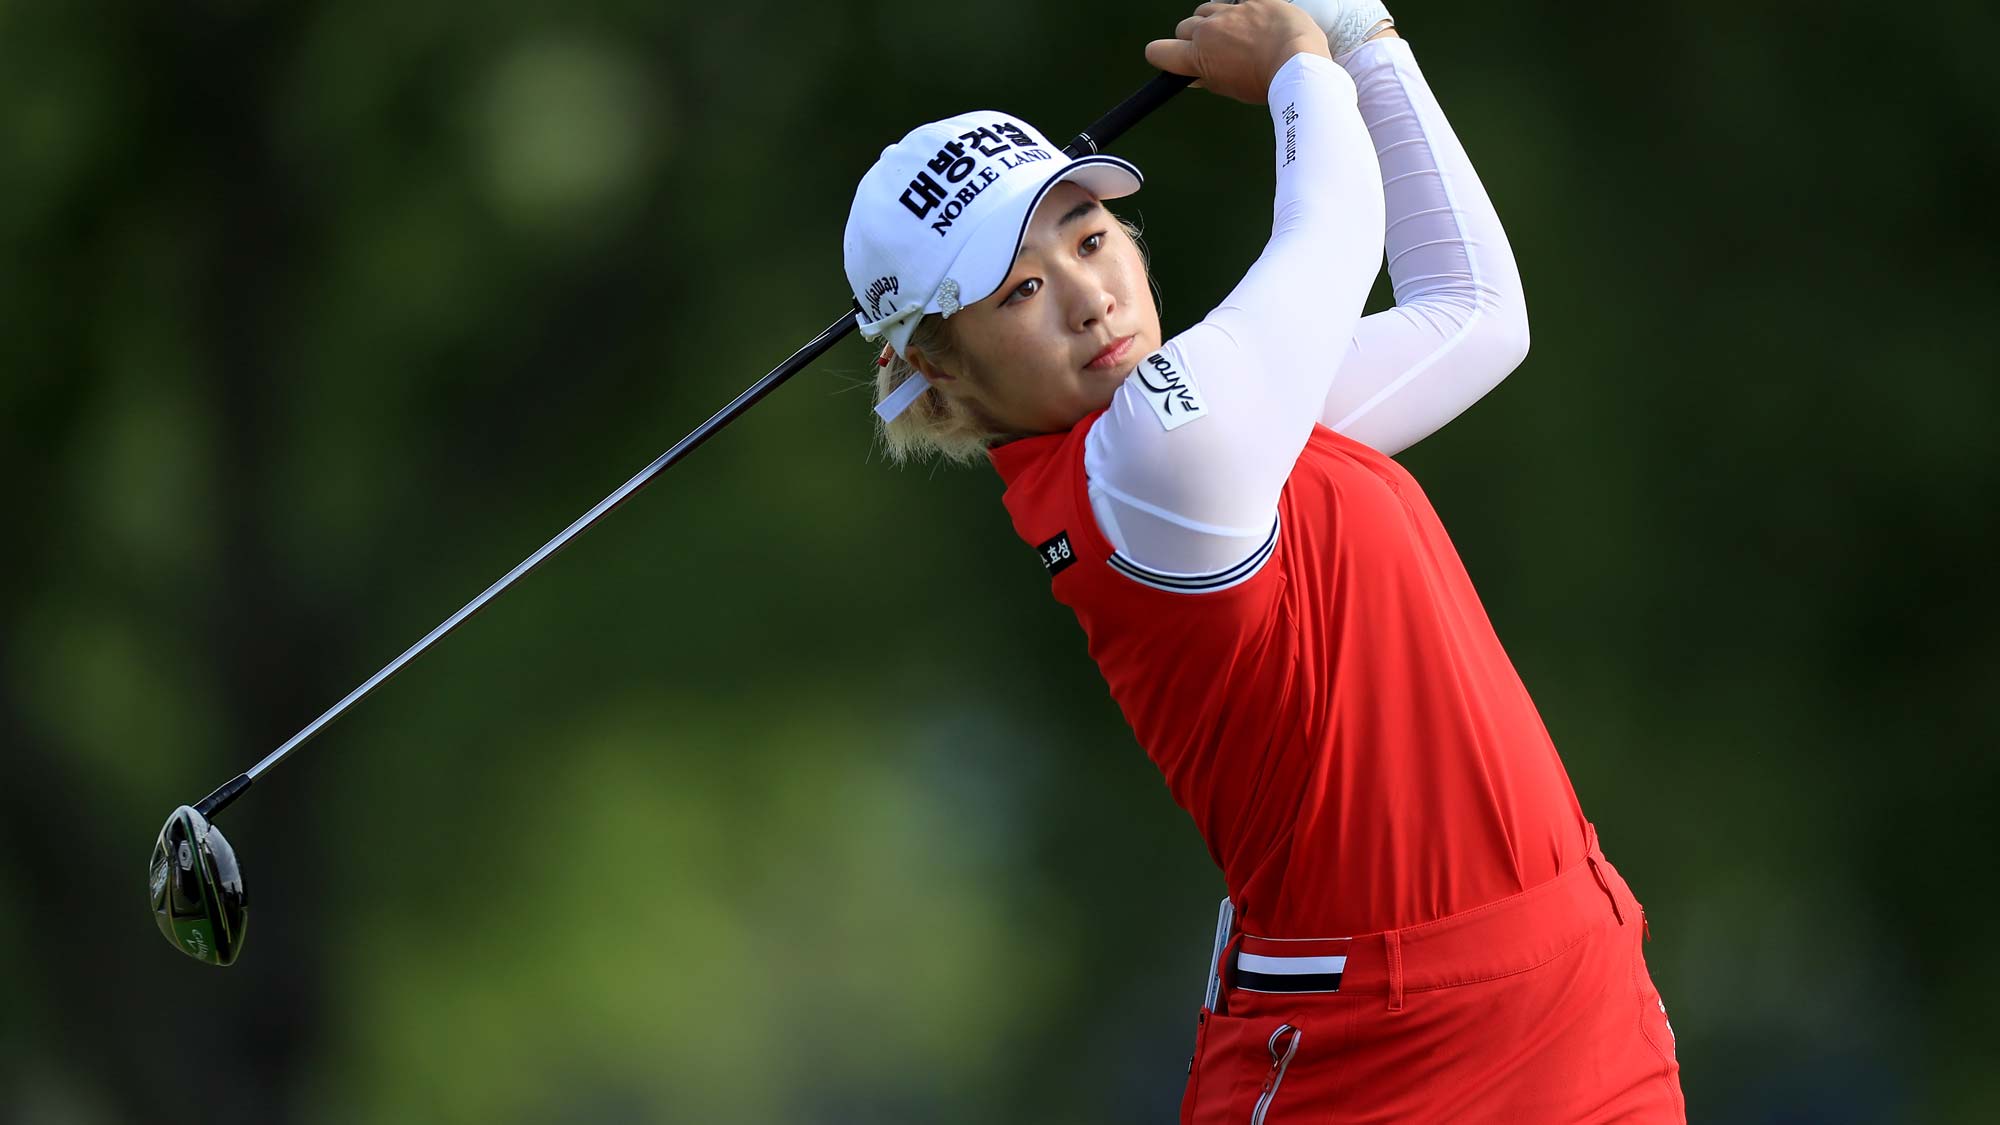 Jeongeun Lee6 of South Korea plays her tee shot on the par 4, 12th hole during the first round of the 2019 KPMG Women's PGA Championship